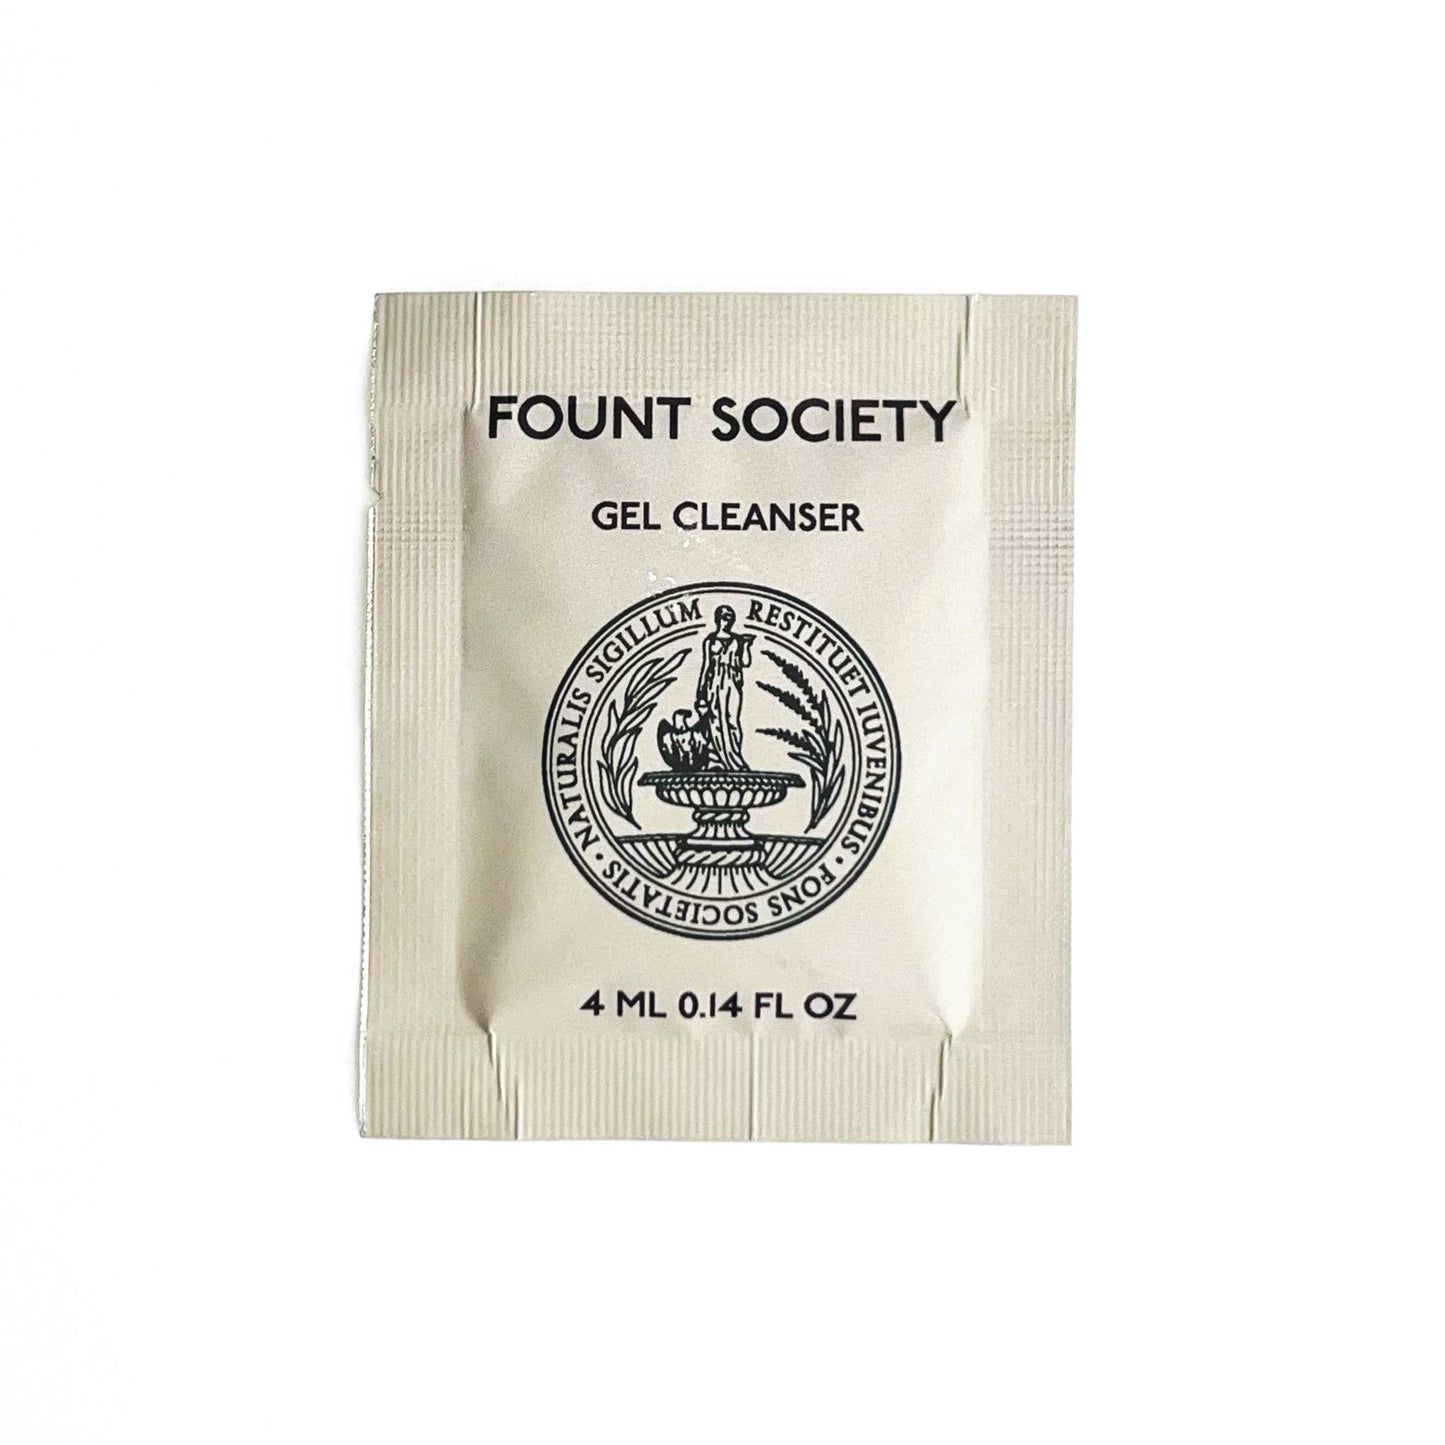 Packet of Fount Society Gel Cleanser